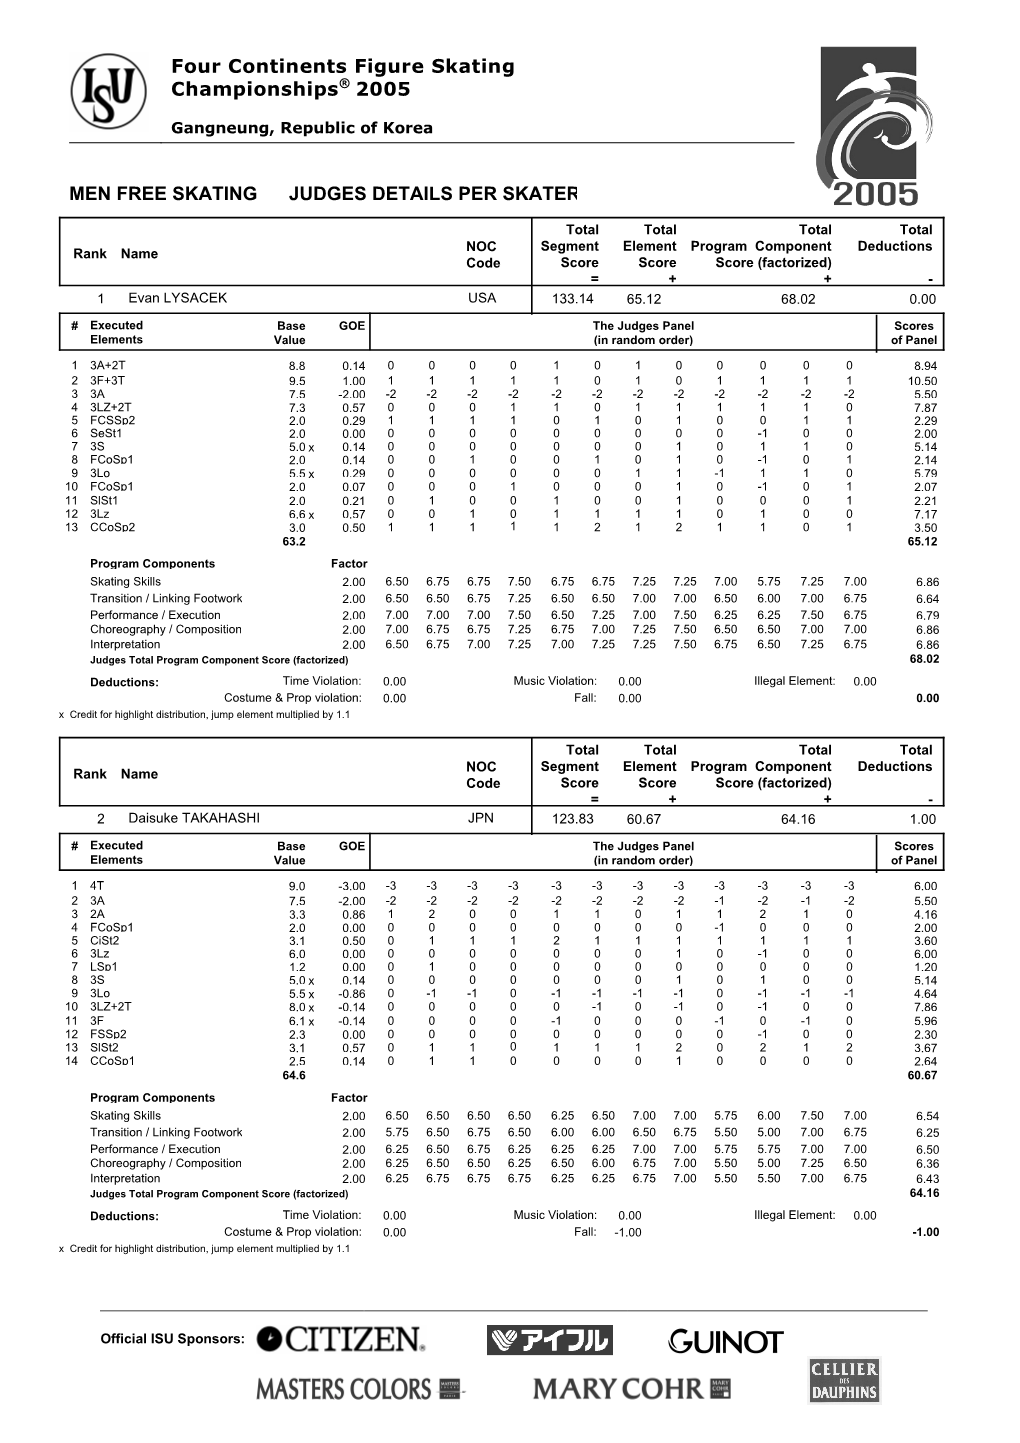 Four Continents Figure Skating Championships® 2005 MEN FREE